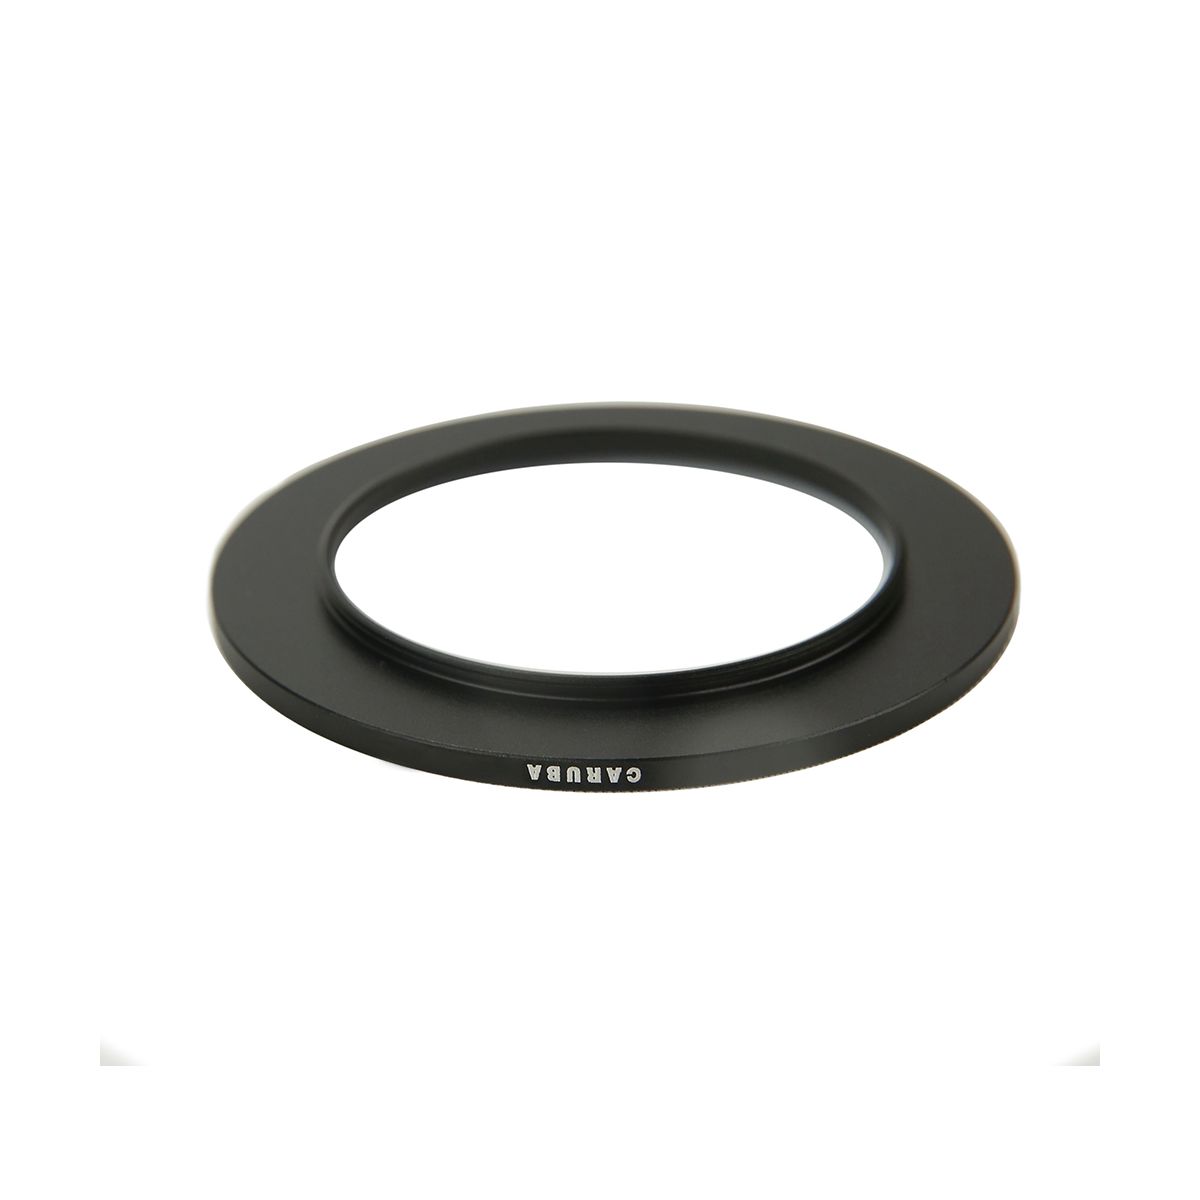 Caruba Step-up/down Ring 43mm - 55mm